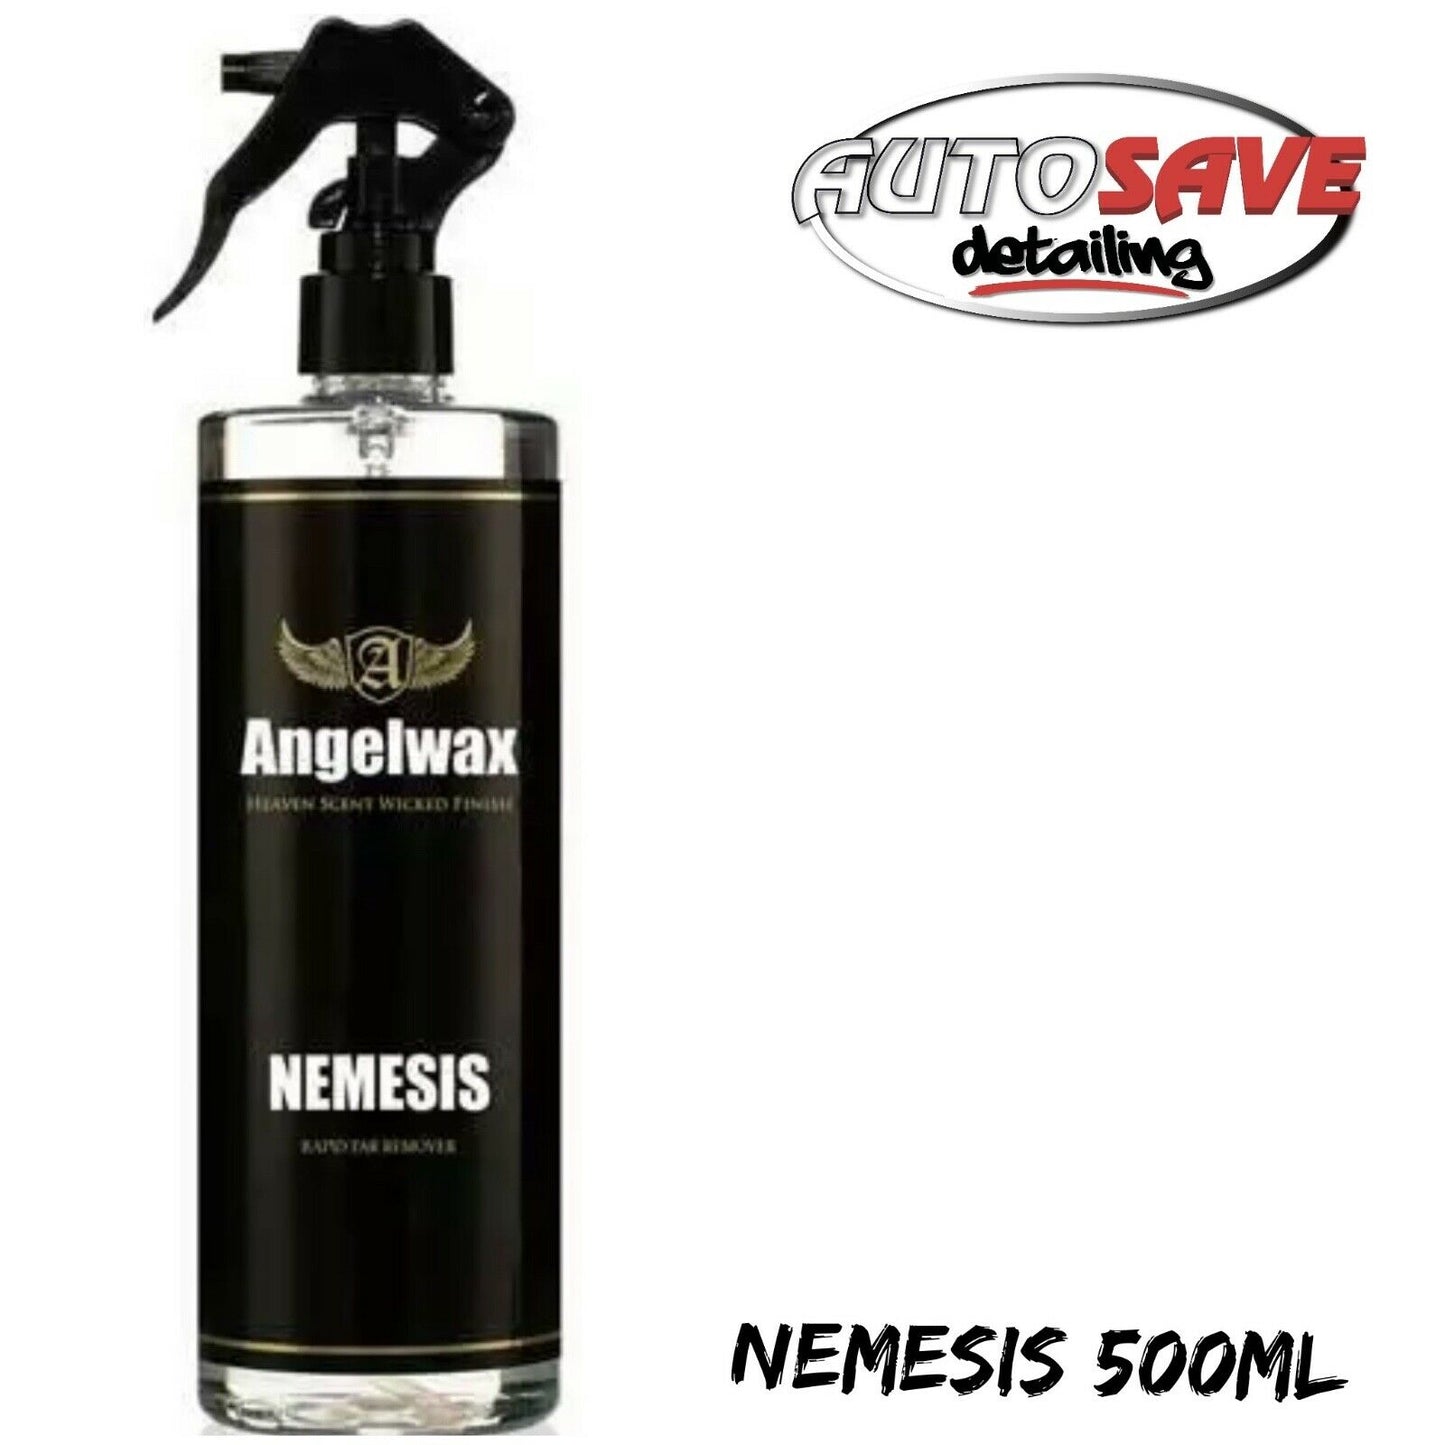 Angelwax Nemesis Rapid Tar Remover 500ml - Tar and Glue Remover